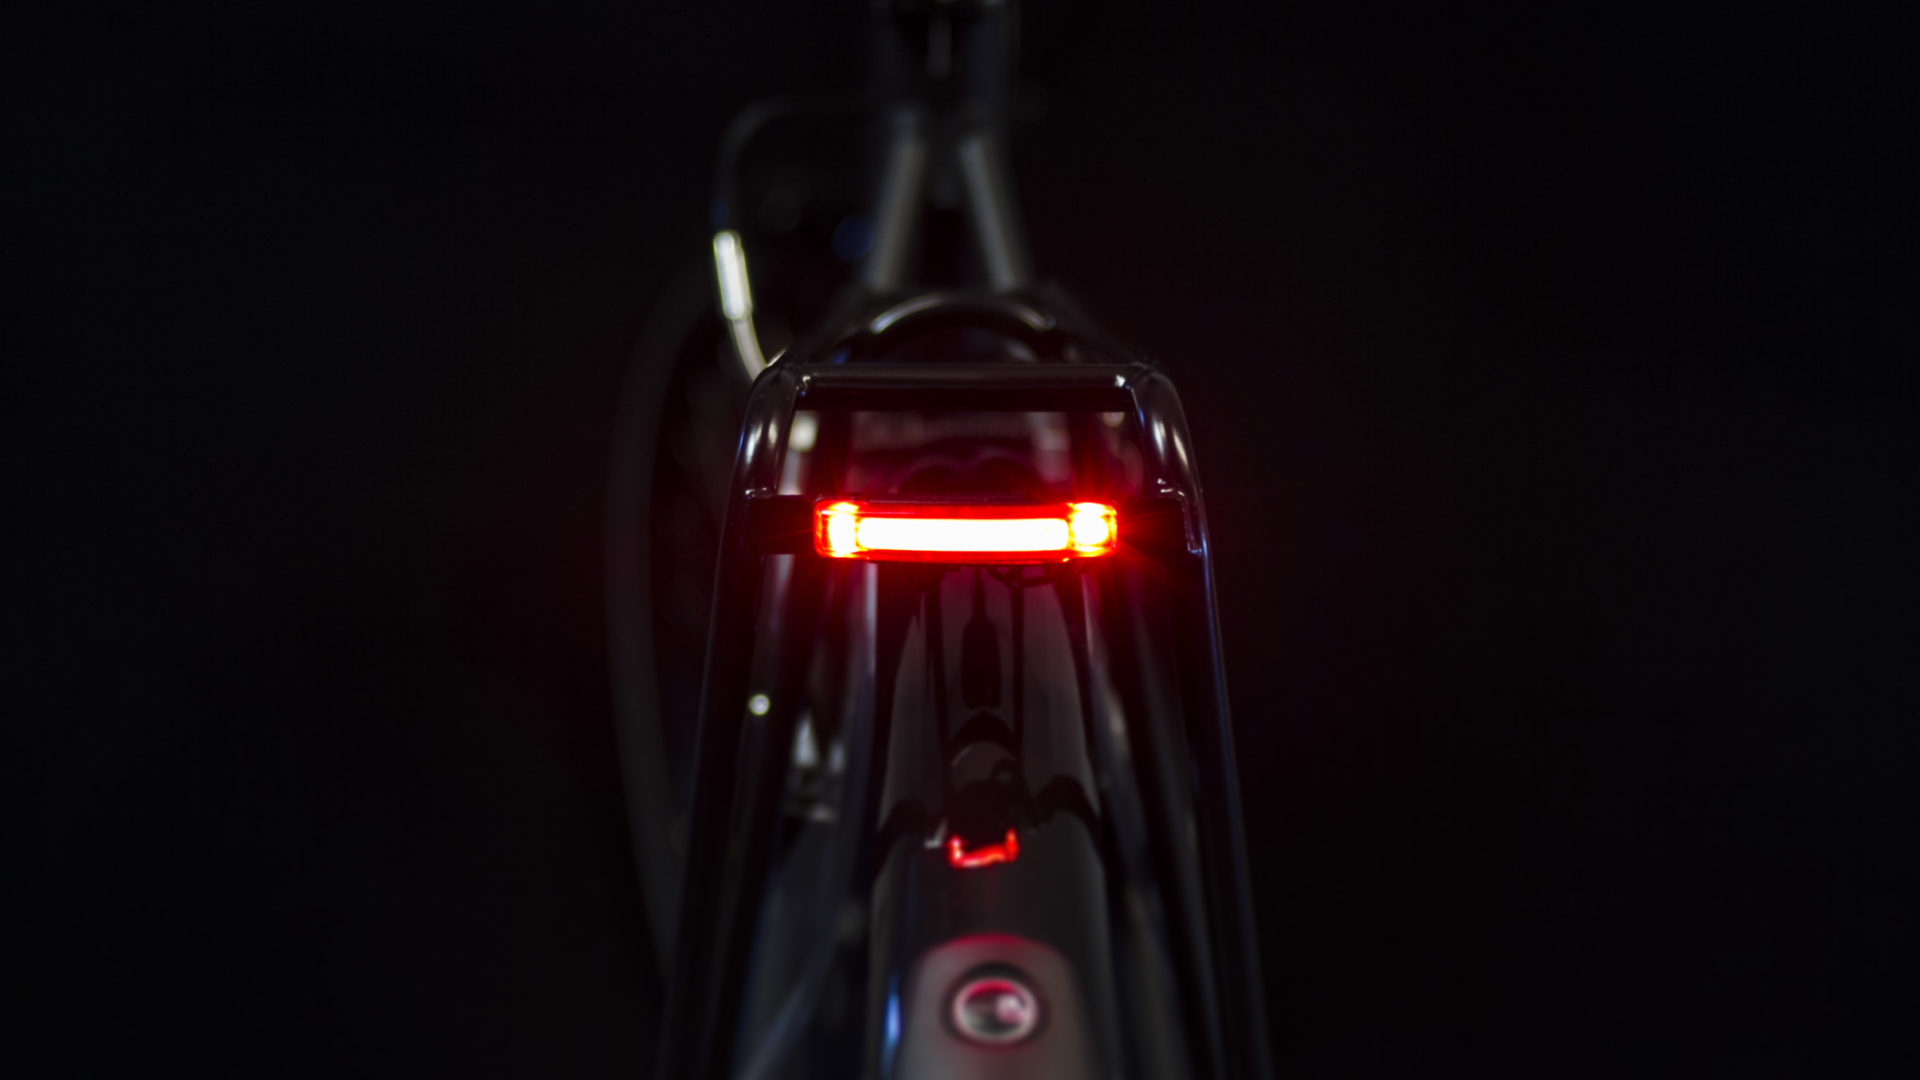 Pimento Speed rearlight for speed e-bike on bike with light and brake light on